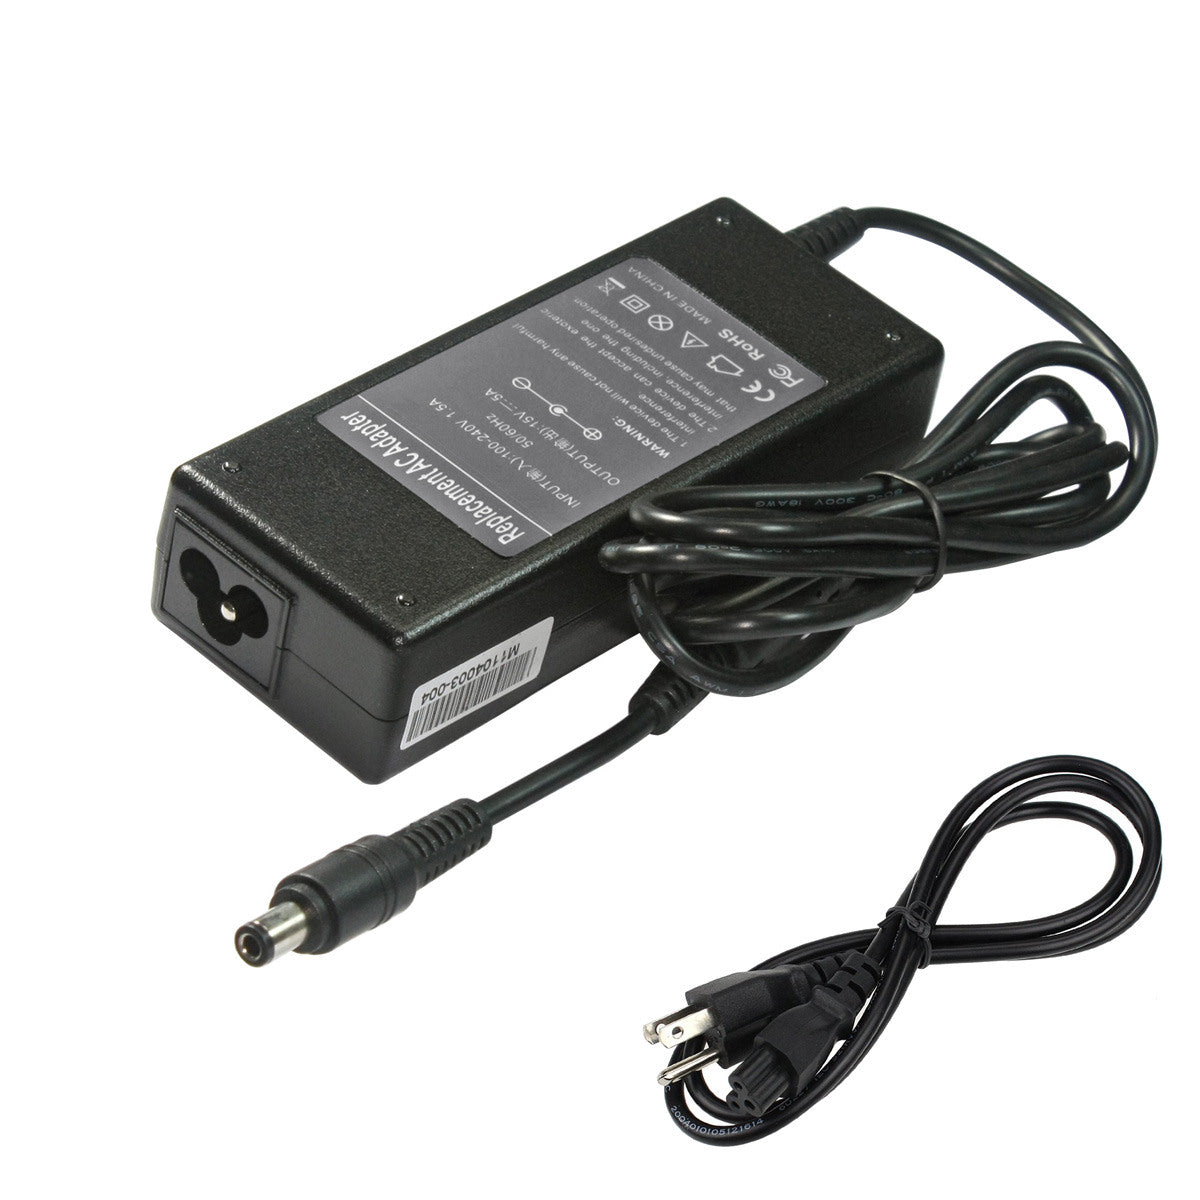 Compatible Replacement Toshiba PA3080U-1ACA Laptop Charger.